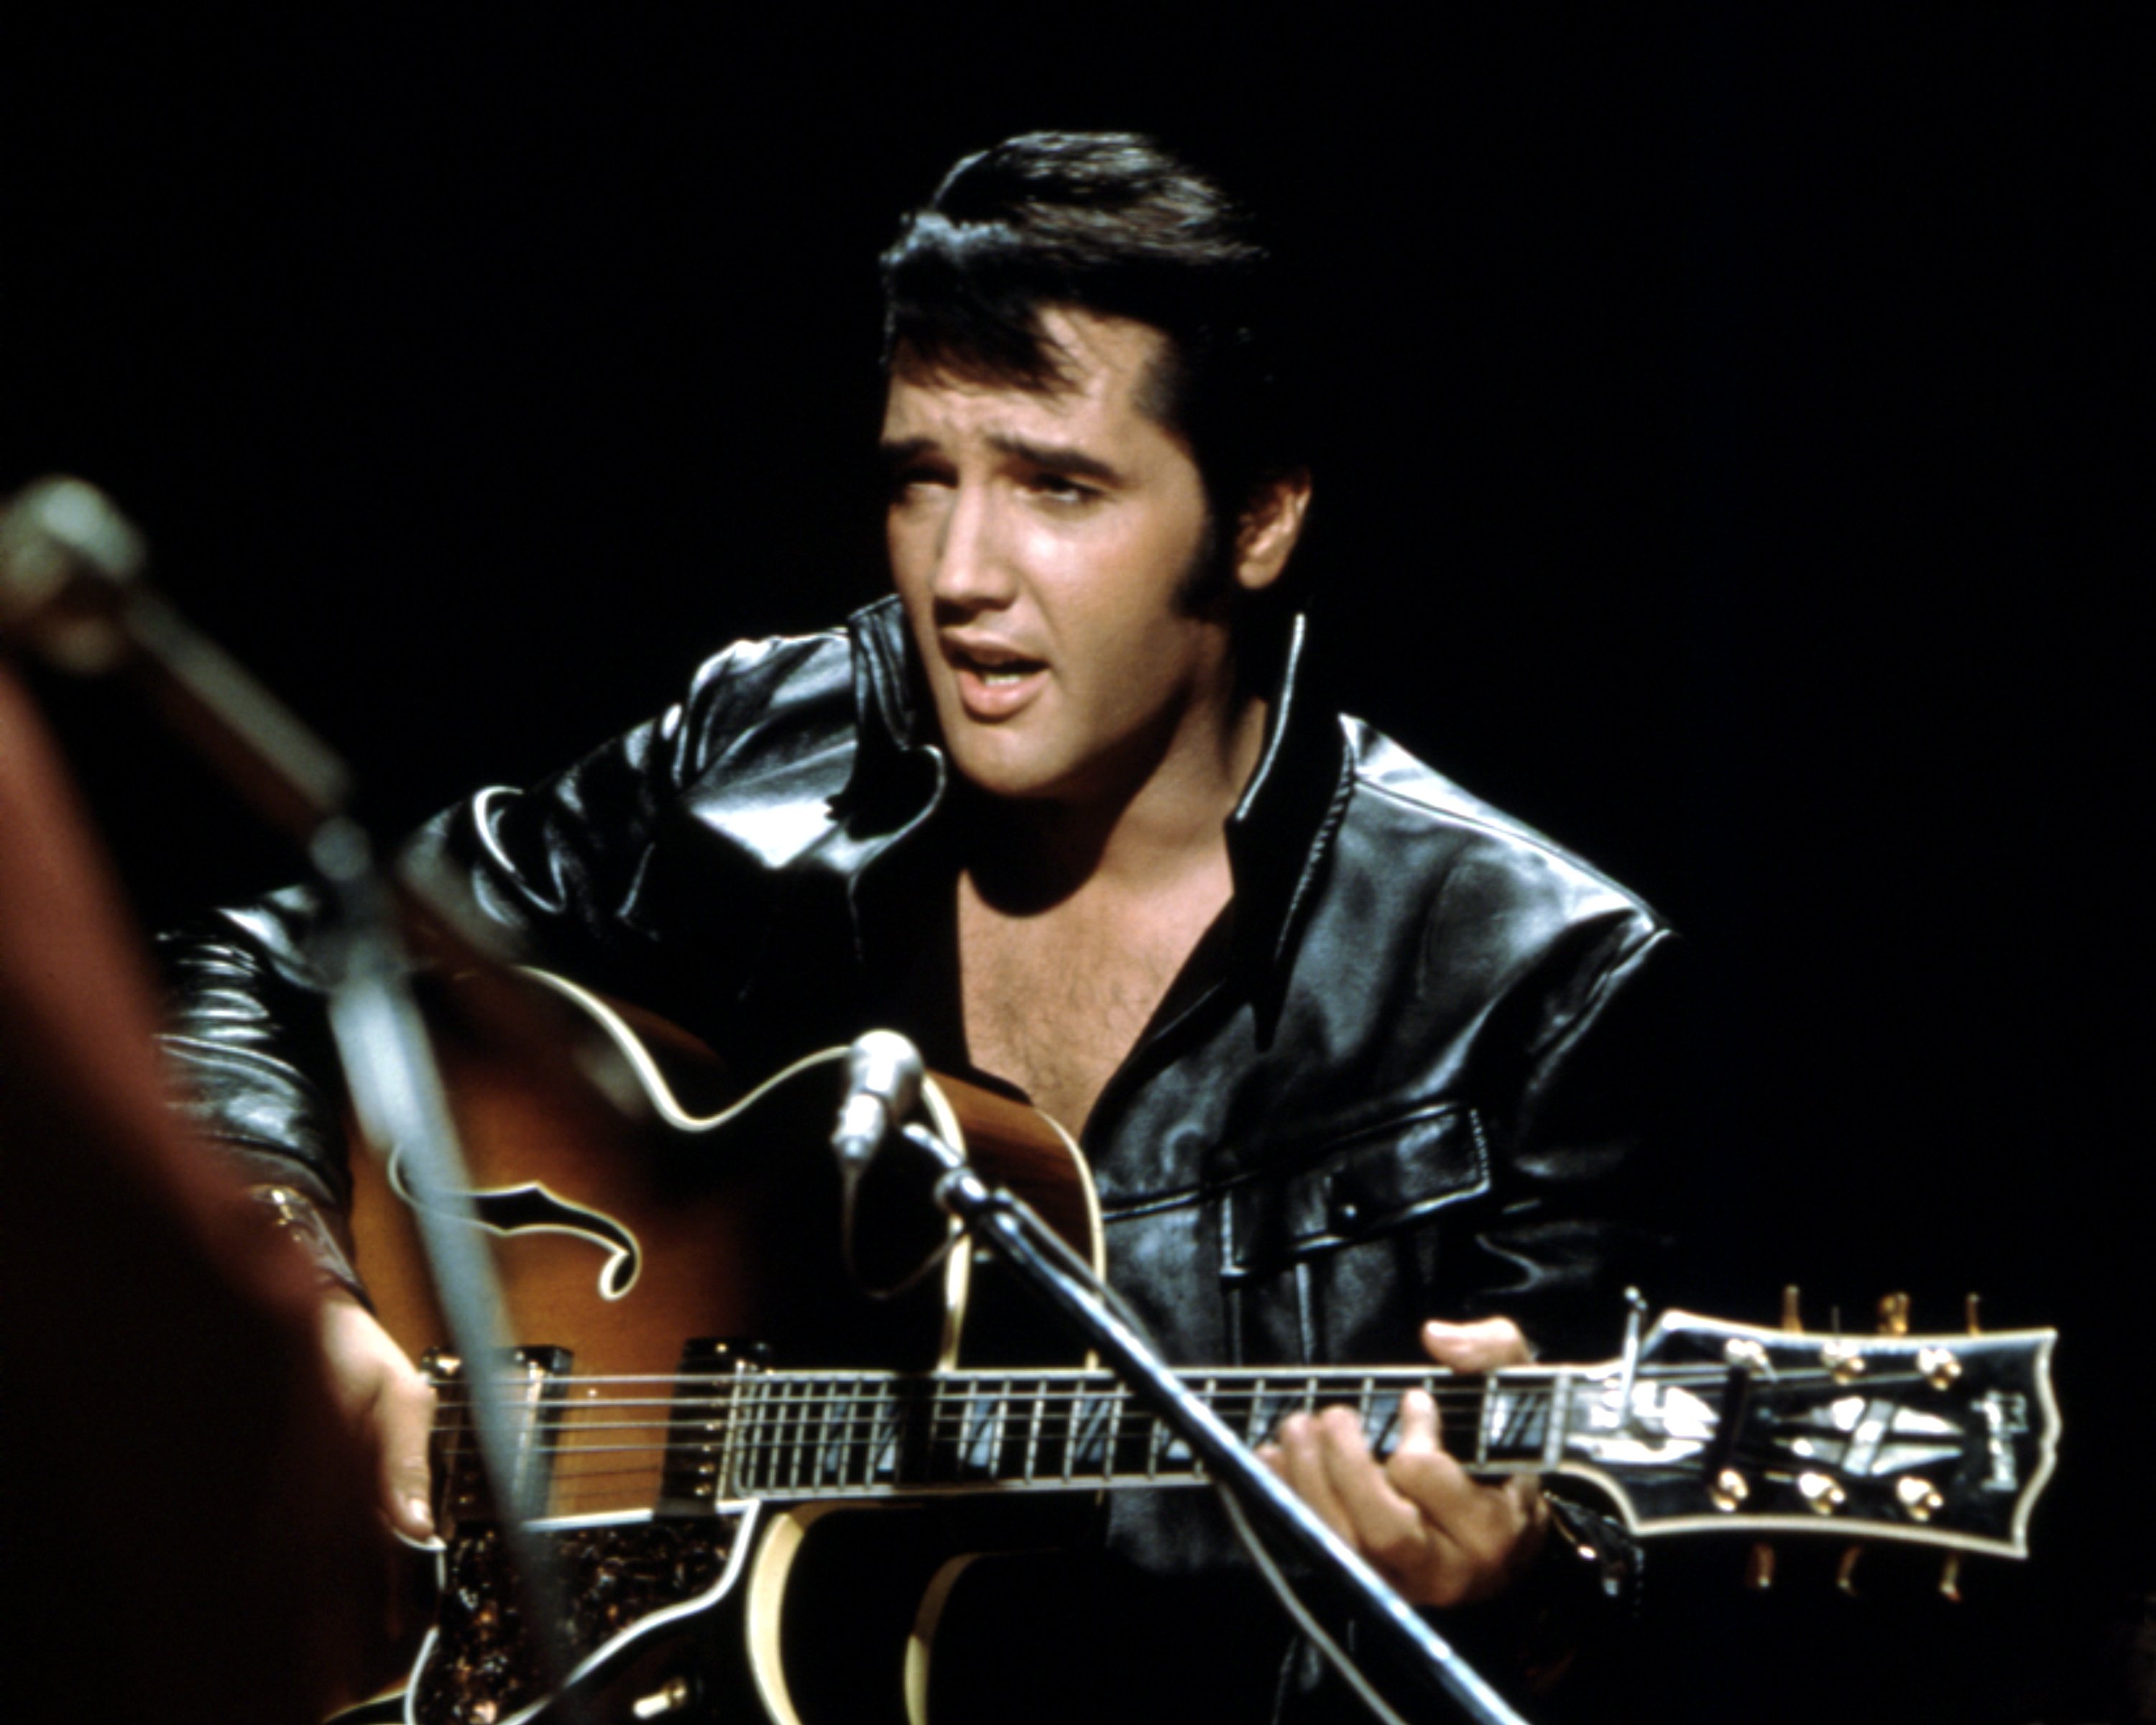 Elvis Presley playing songs on a guitar in the ''68 Comeback Special'